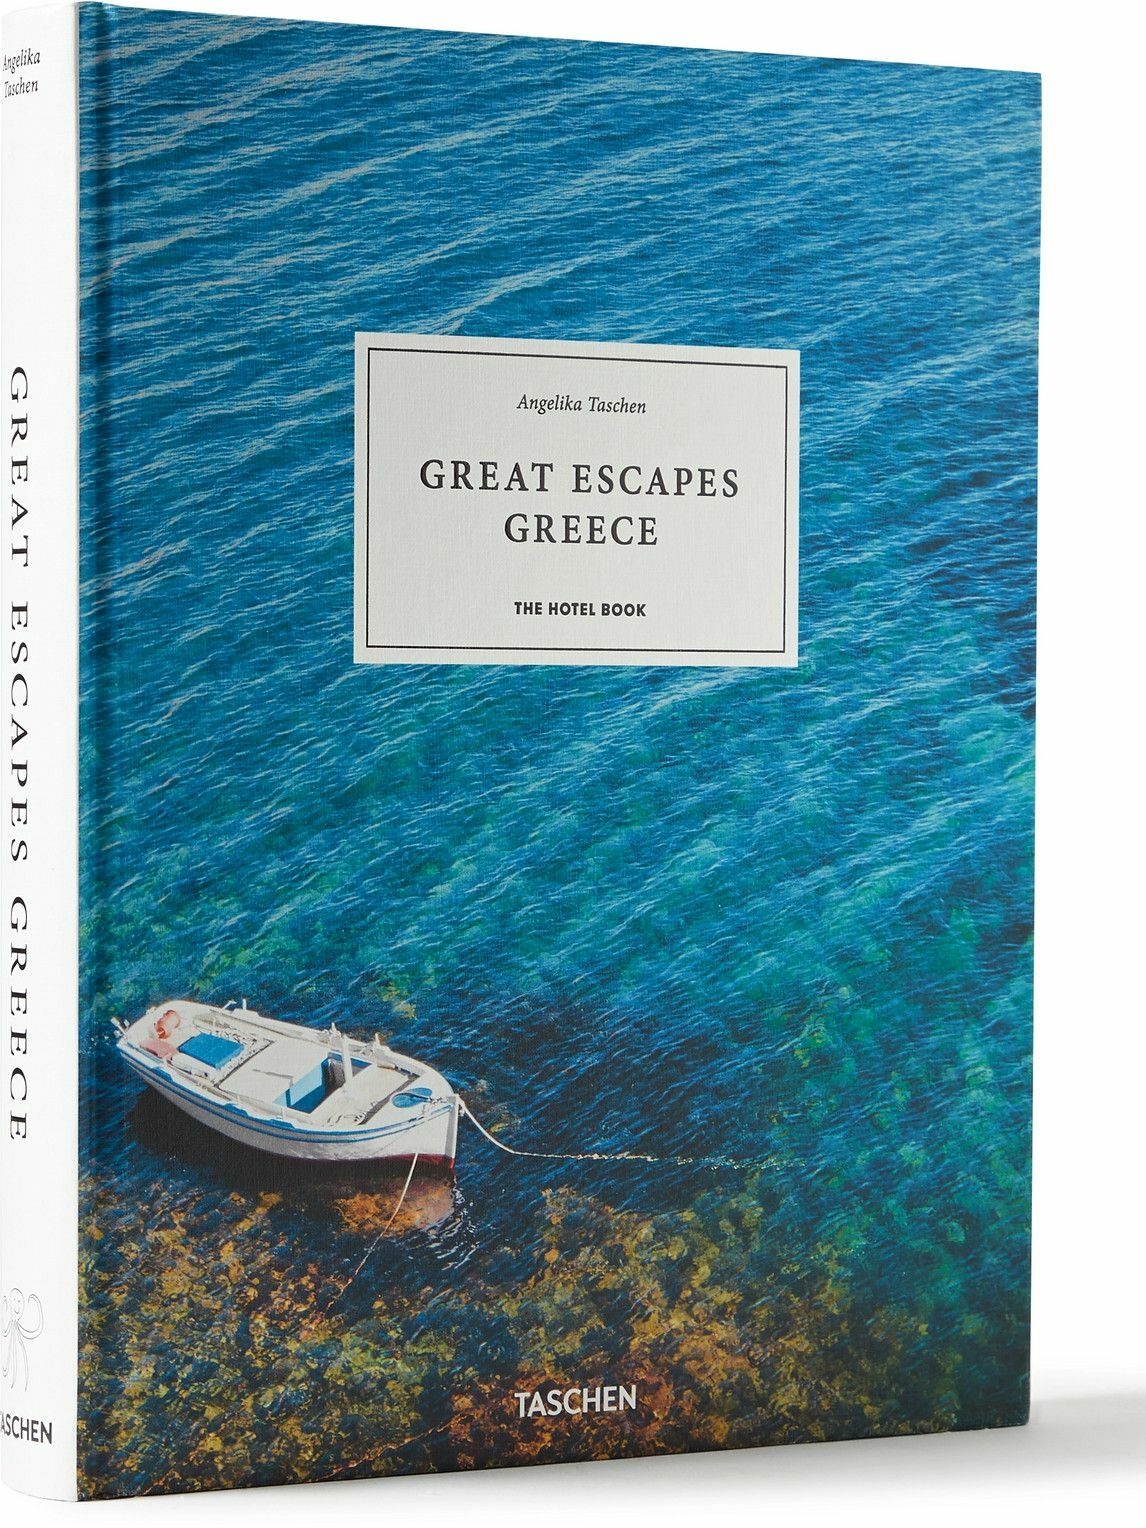 Photo: Taschen - The Hotel Book: Great Escapes Greece Hardcover Book